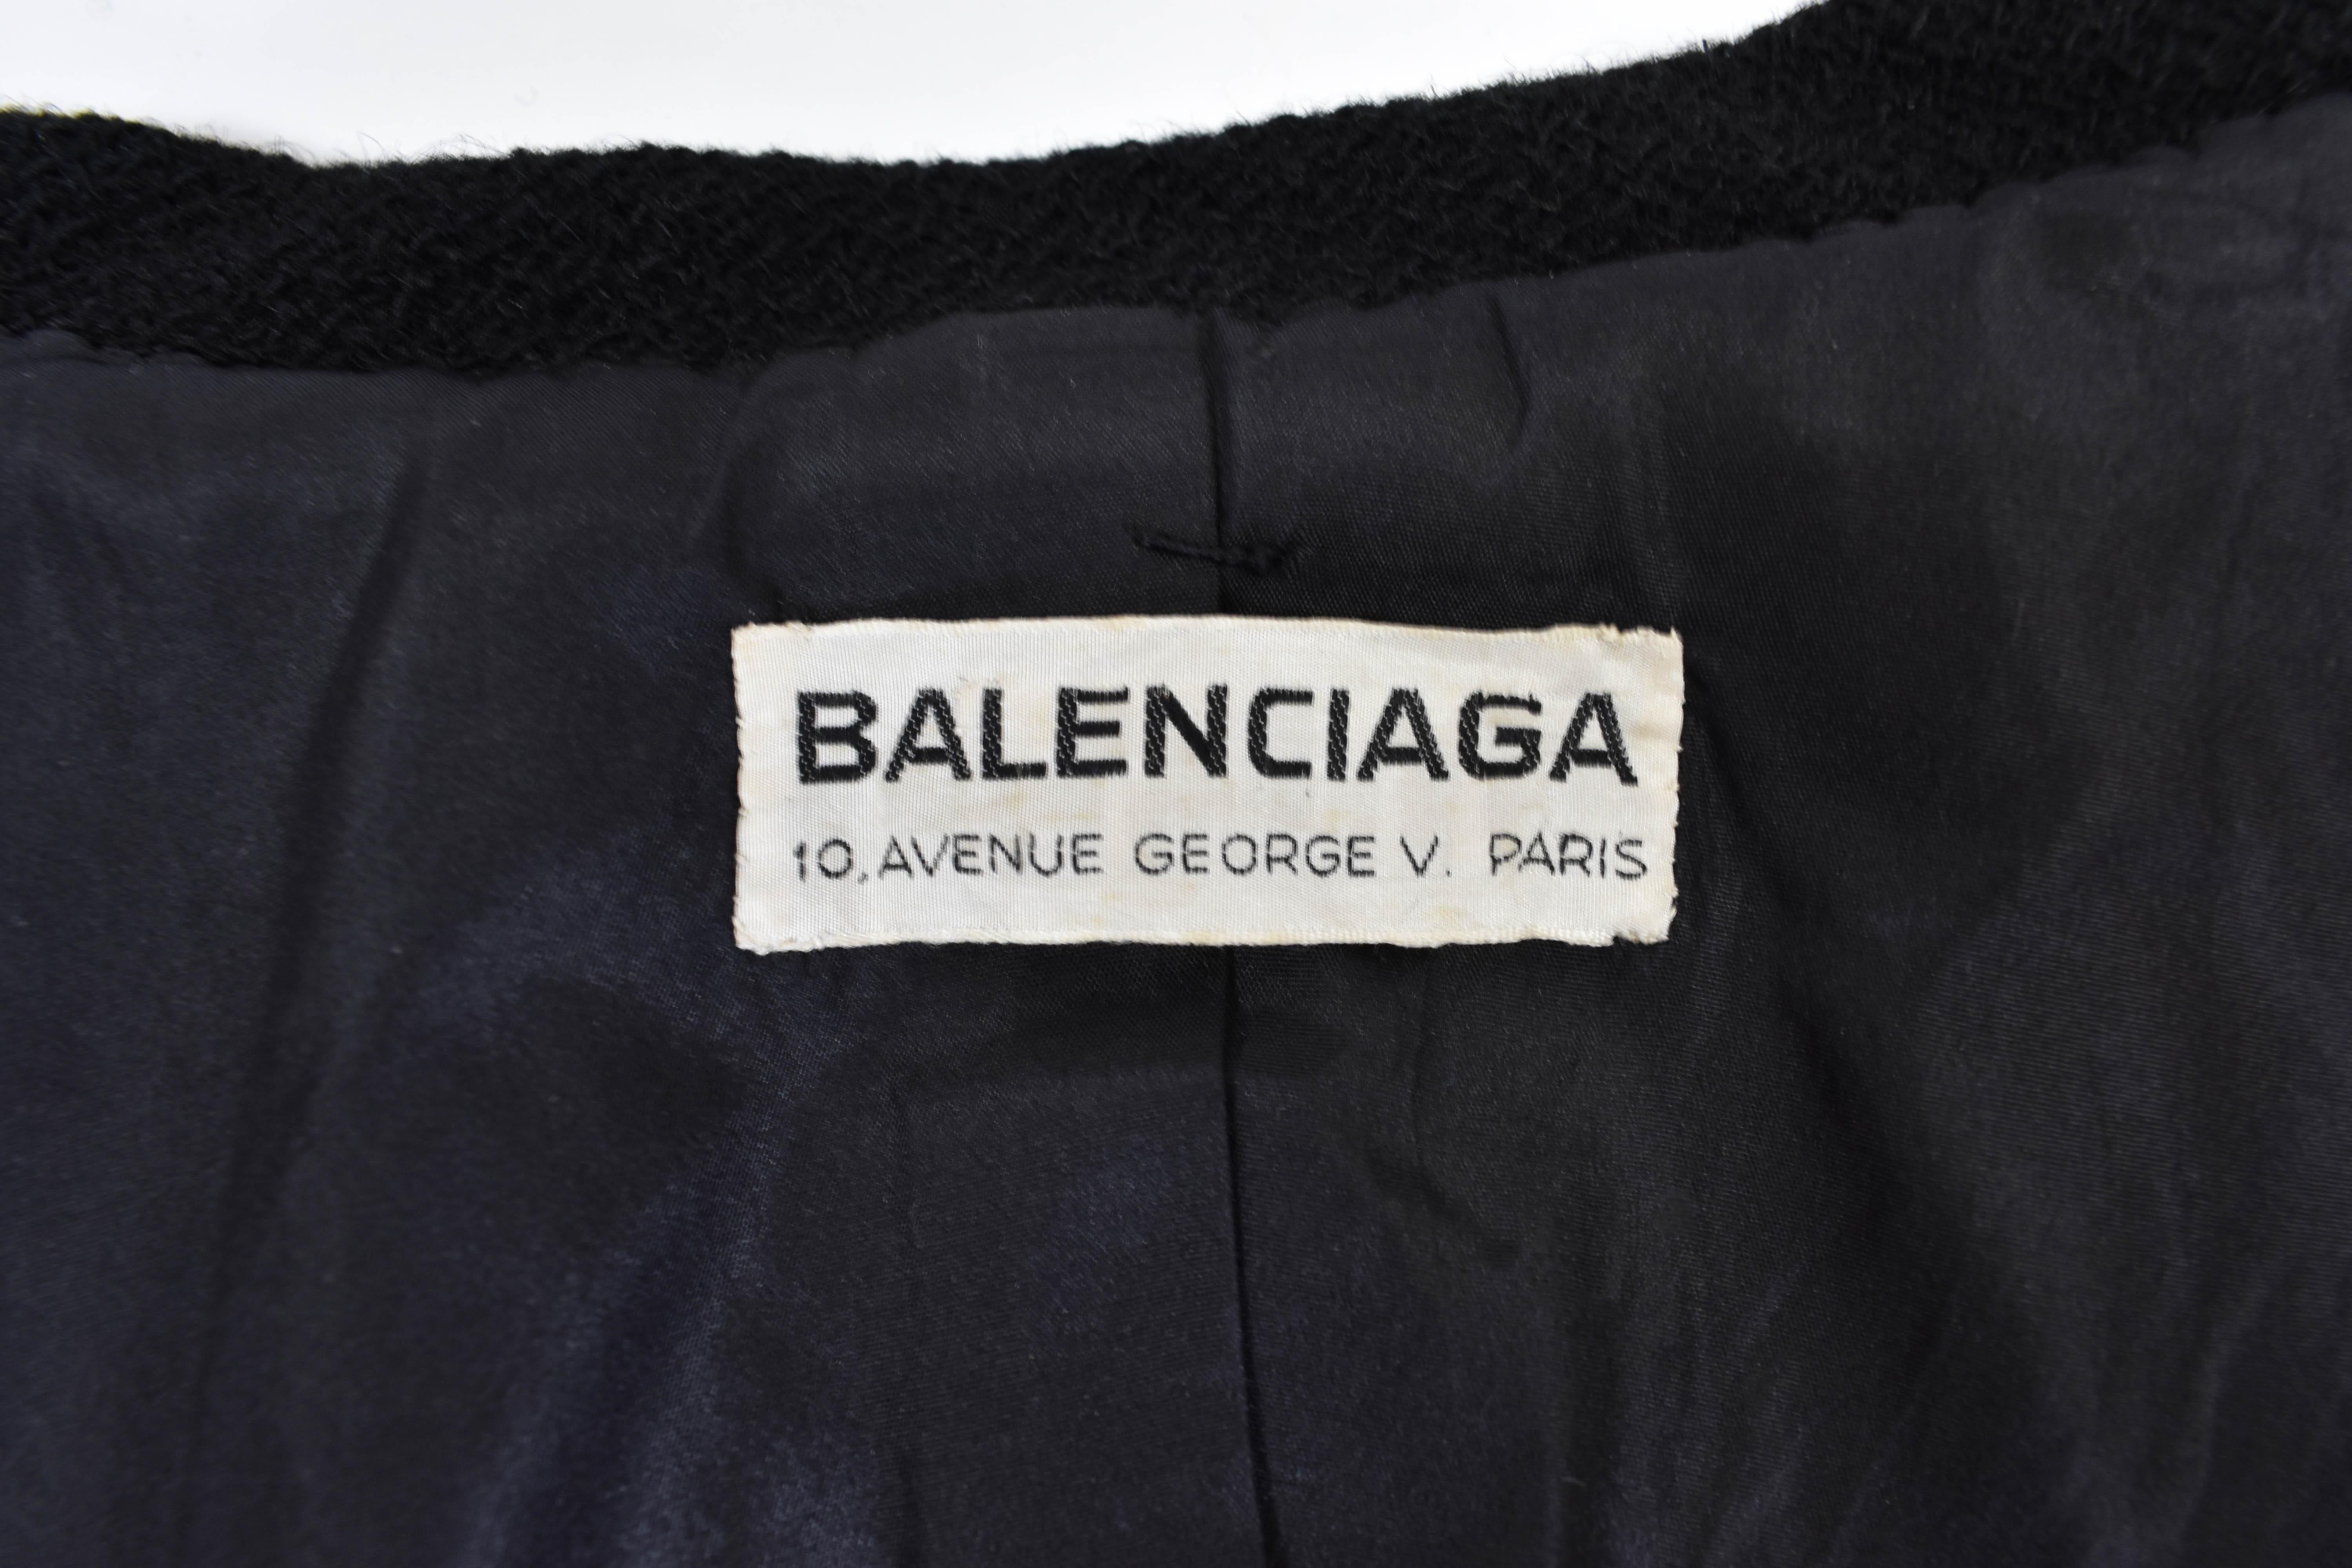 1950s Cristóbal Balenciaga Haute Couture Black Cape with Sleeves, Numbered 62289 3